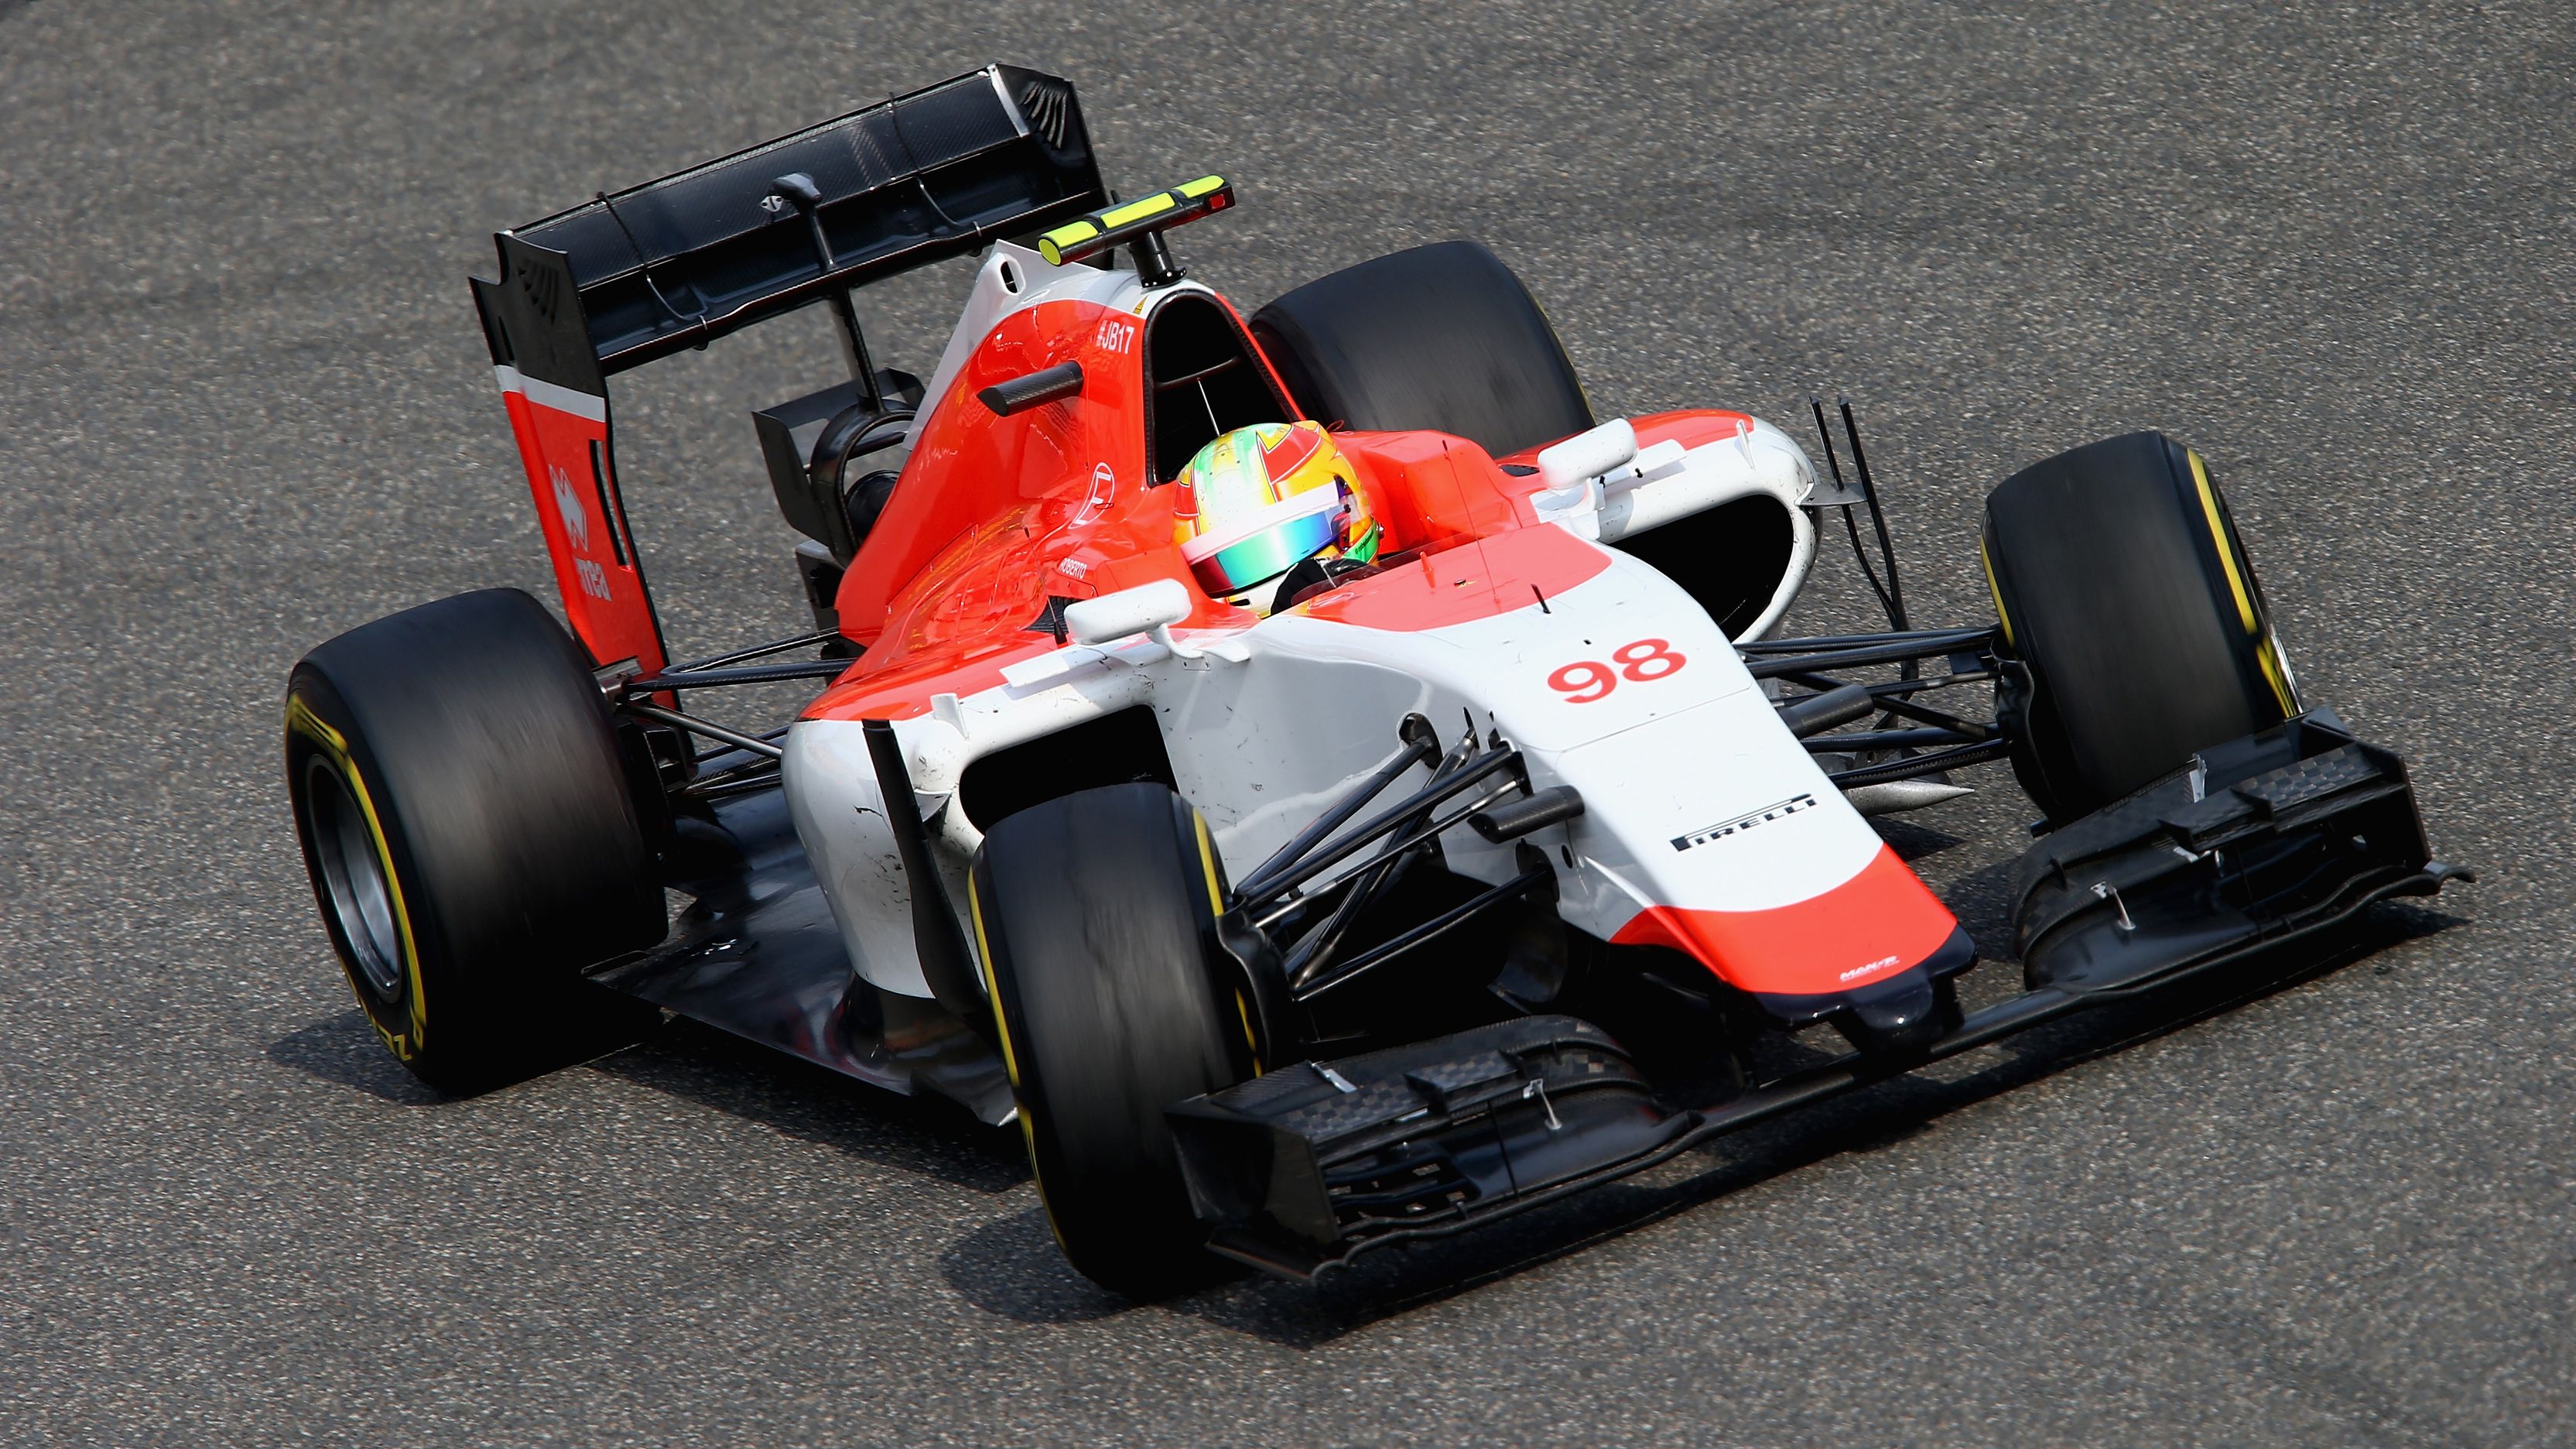 Roberto Merhi during practice for the Formula 1 Chinese Grand Prix at the Shanghai International Circuit in 2015.